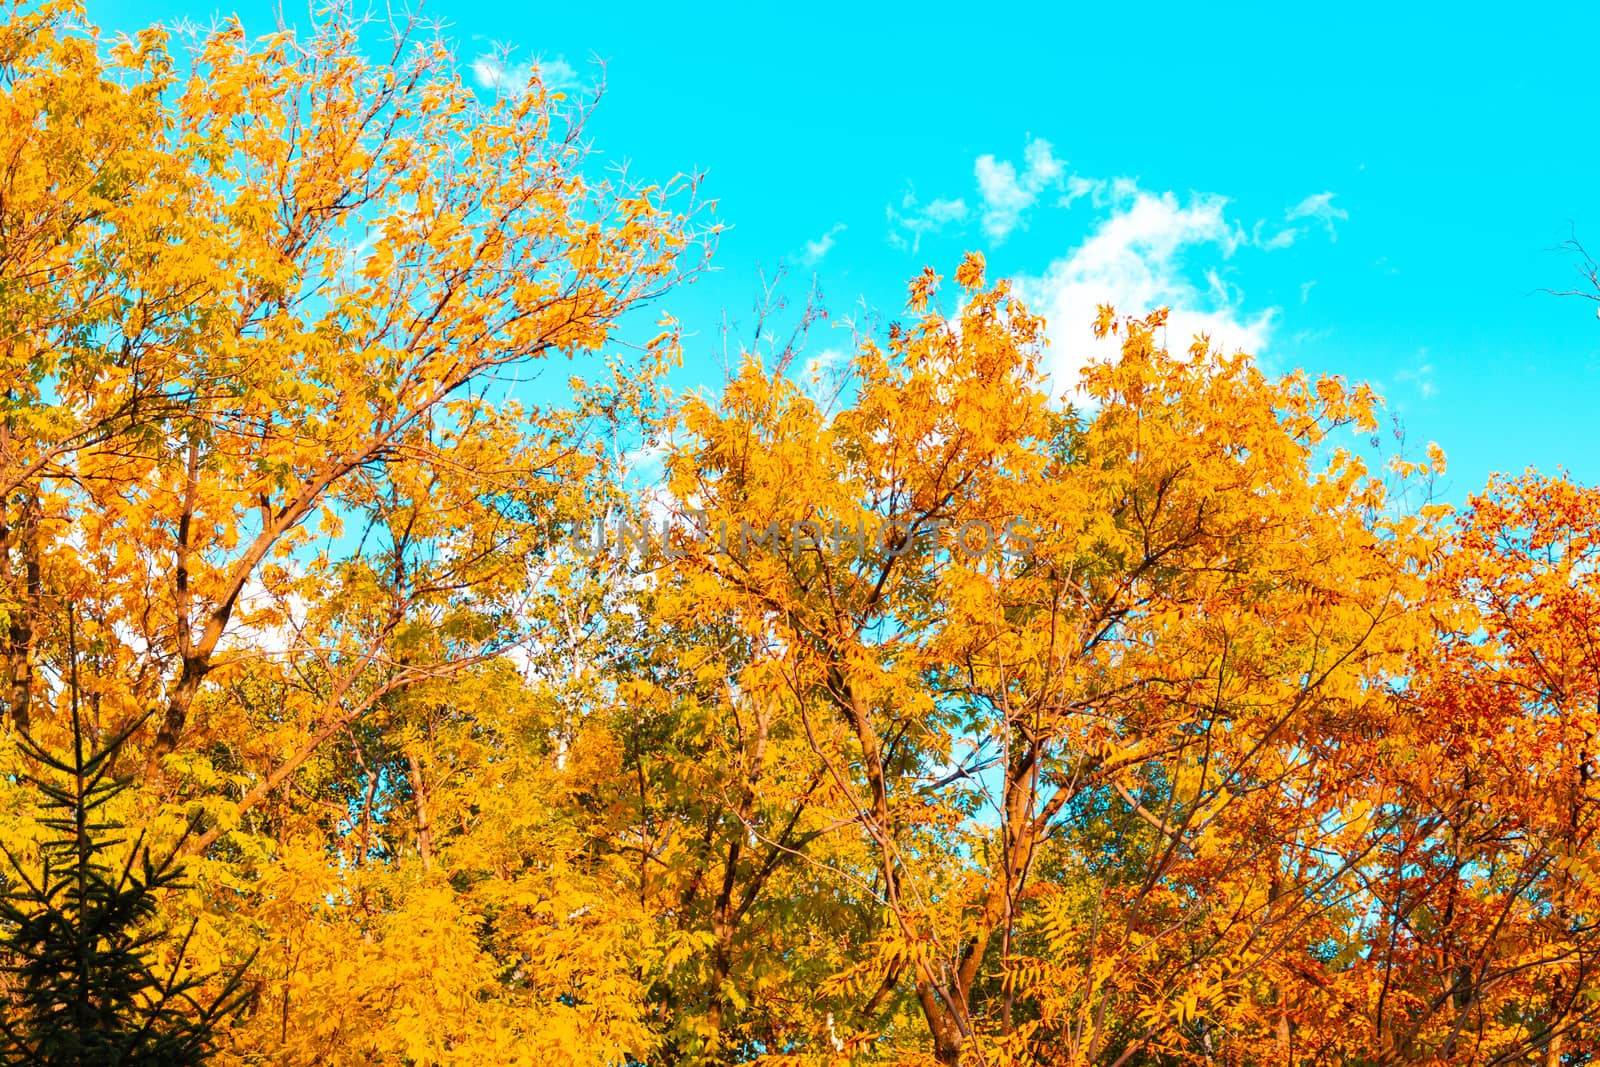 Trees with autumn yellow and orange leaves. Against the blue sky.